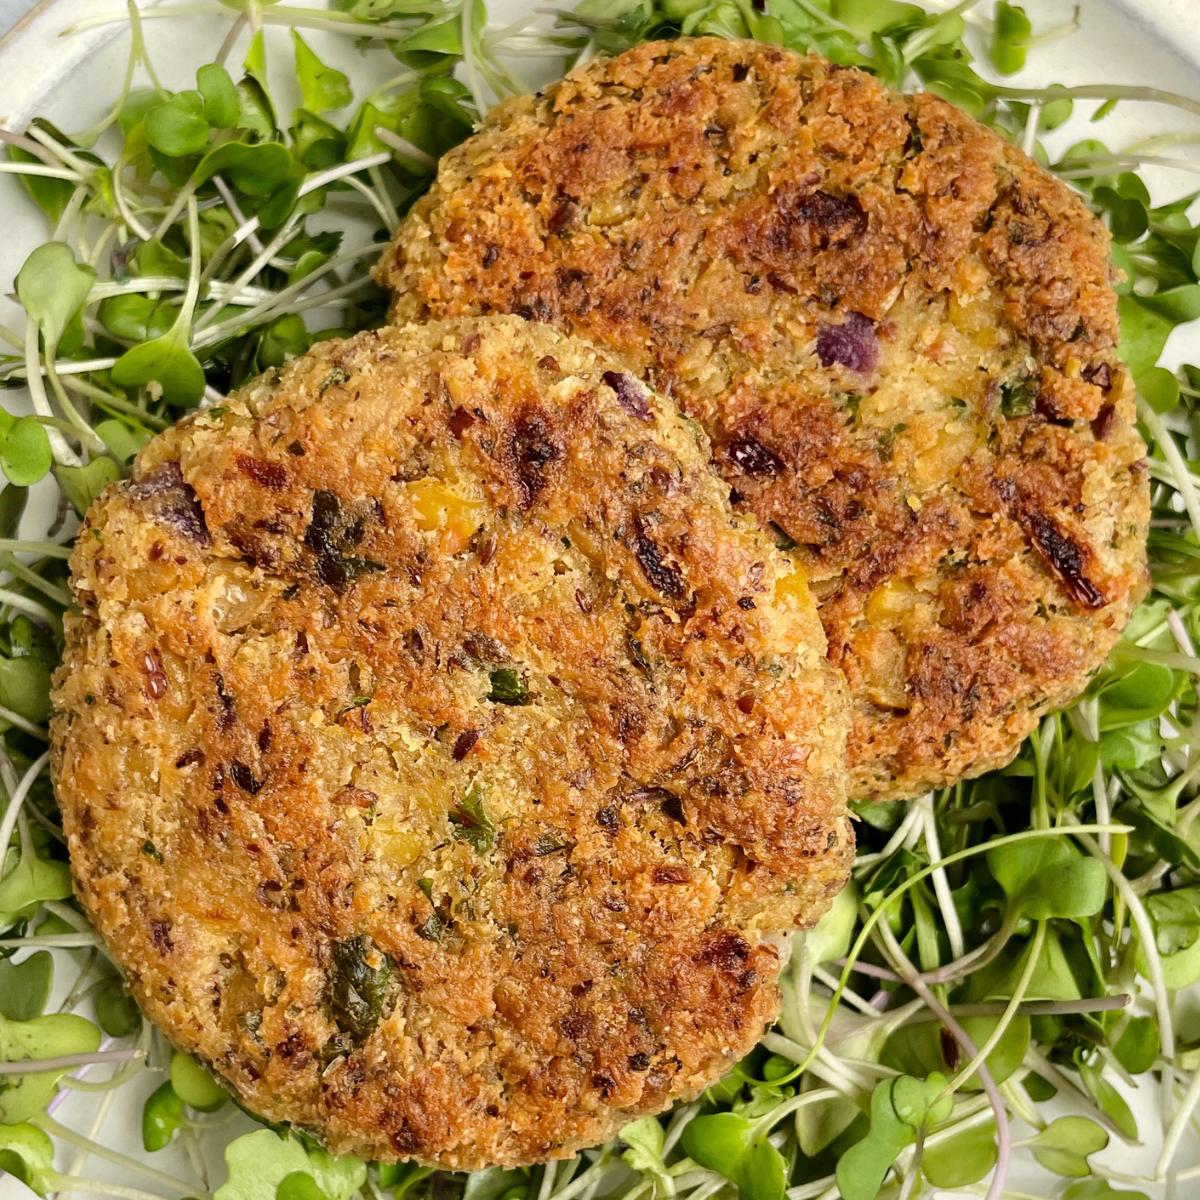 Vegan chickpea patties on a bed of microgreens.